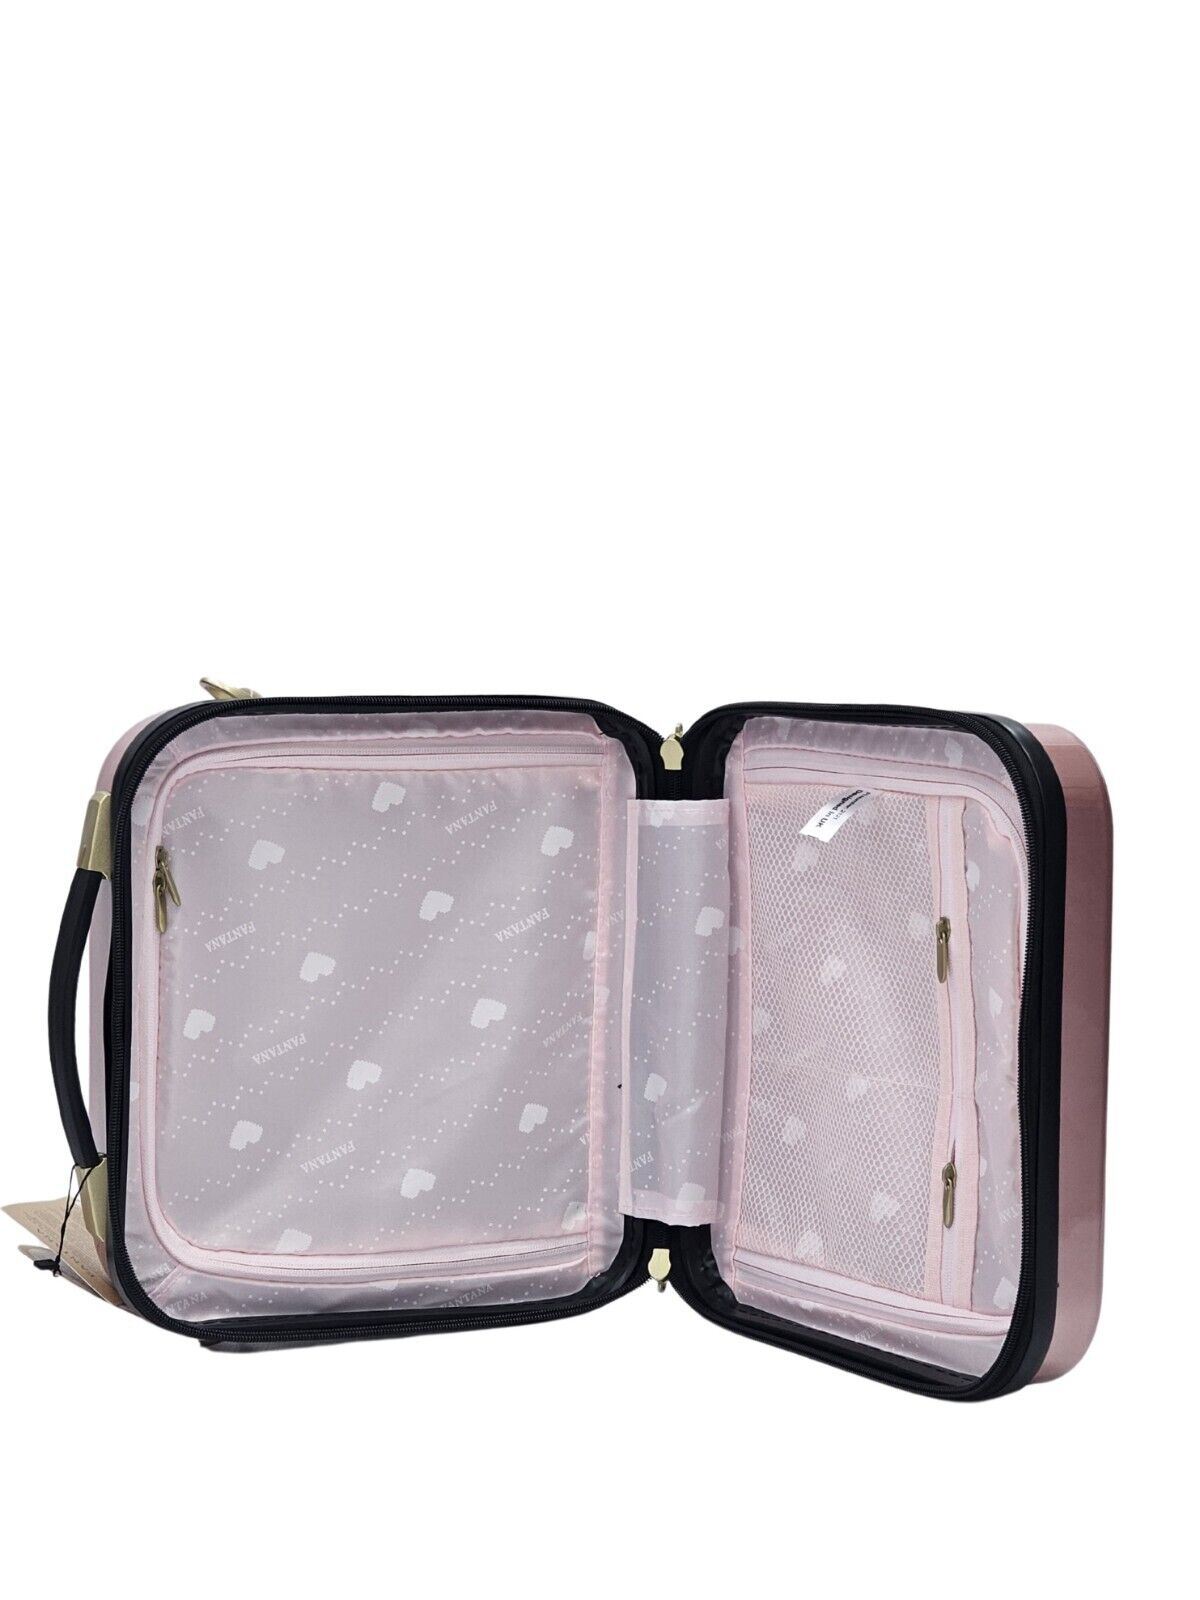 Butler Cosmetic Hard Shell Suitcase in Pink